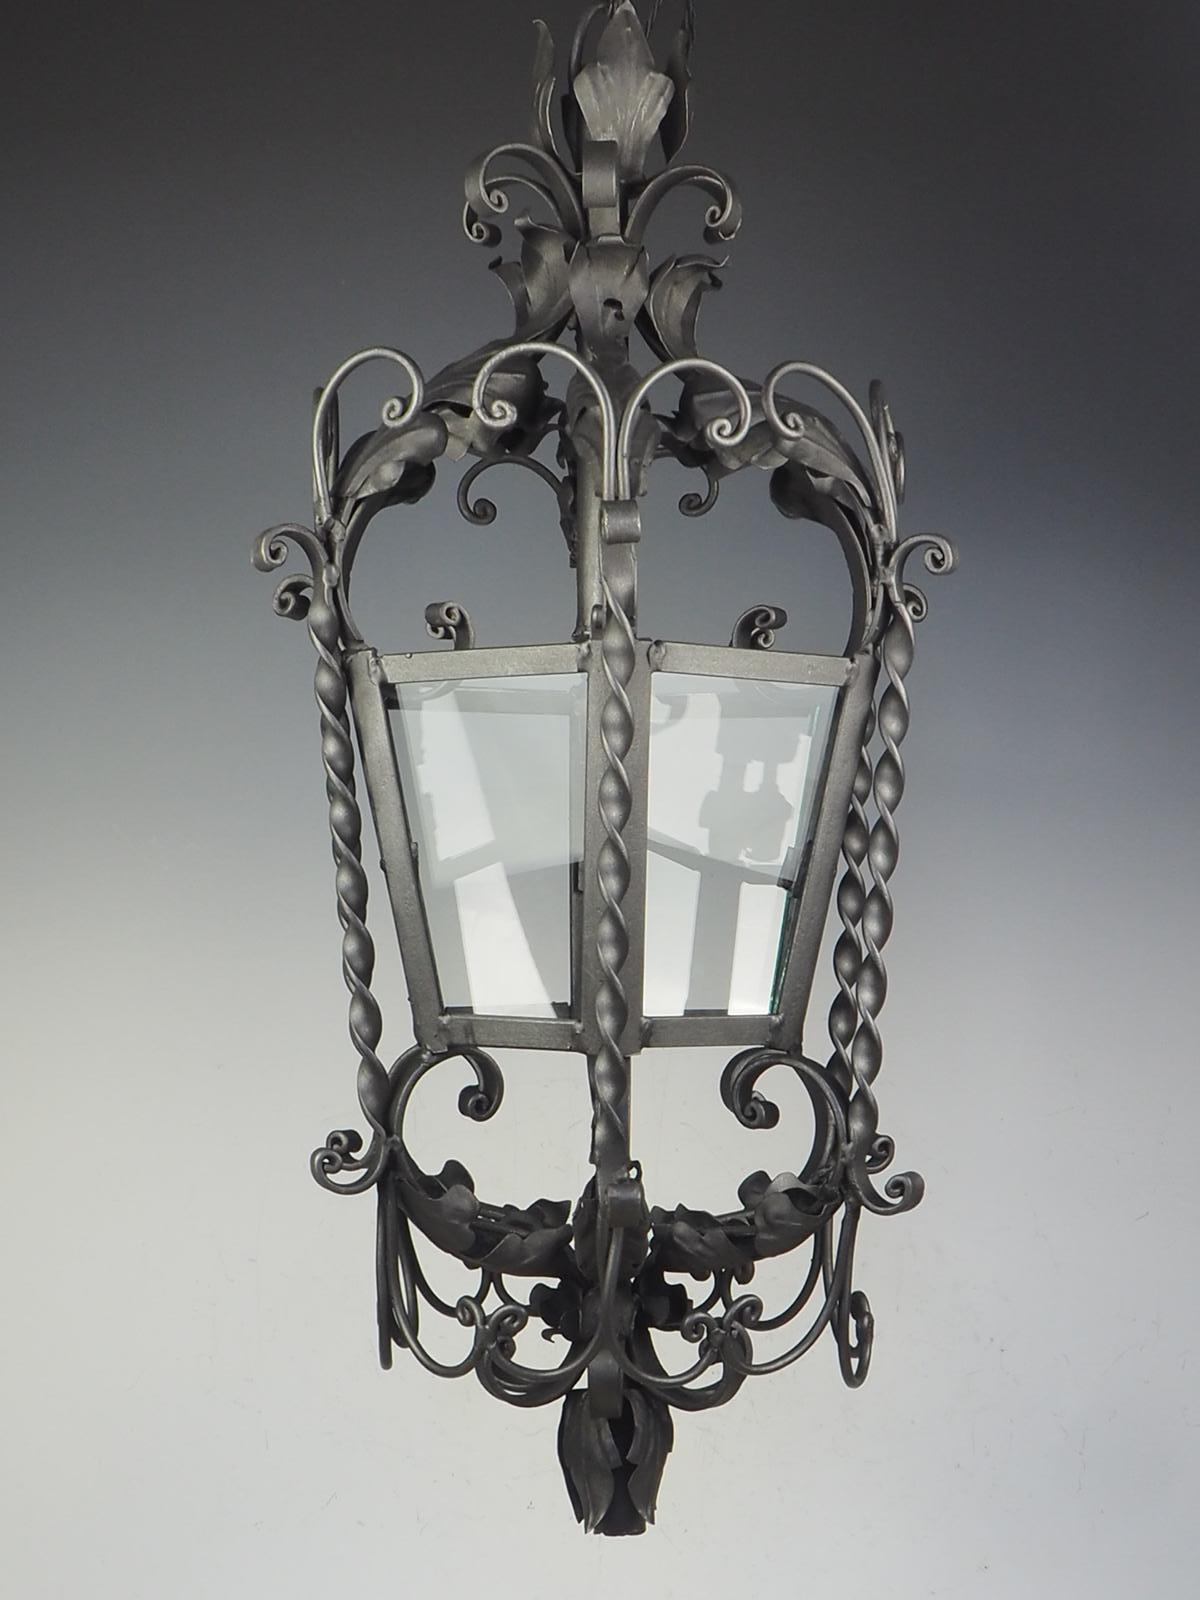 19th Century Large Ornate French Wrought Iron Lantern

A magnificent oversized French antique ceiling single-light lantern, open-framed tapering hexagonal shape, ornately decorated with leafy foliage and scrolls.